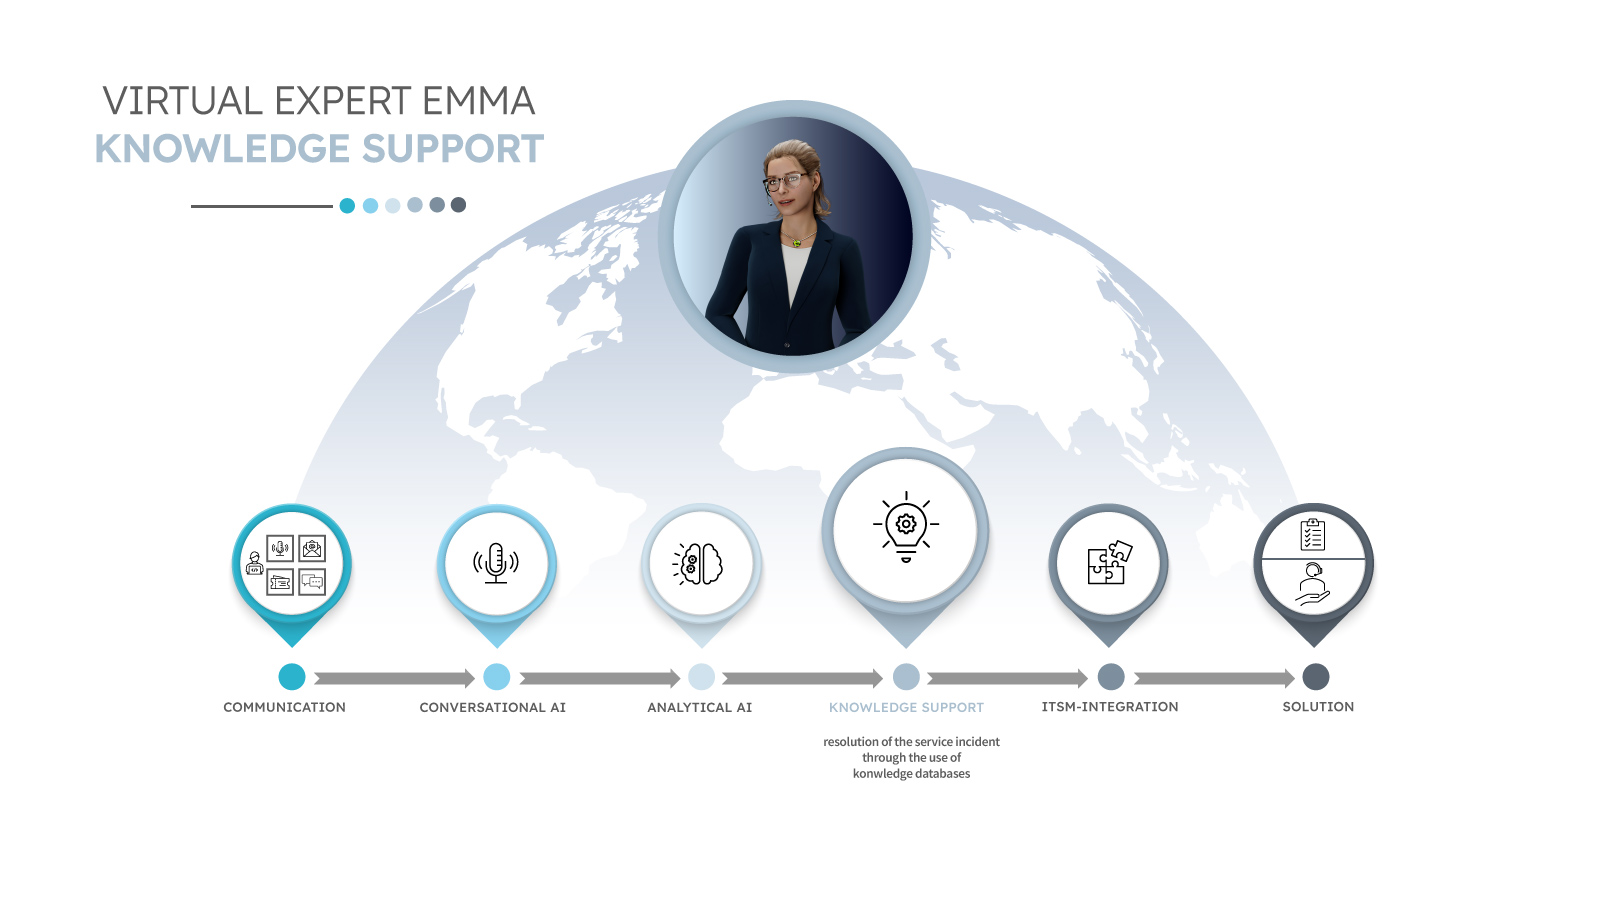 Virtual-Expert-blau-Infographic—Knowledge-Support-eng